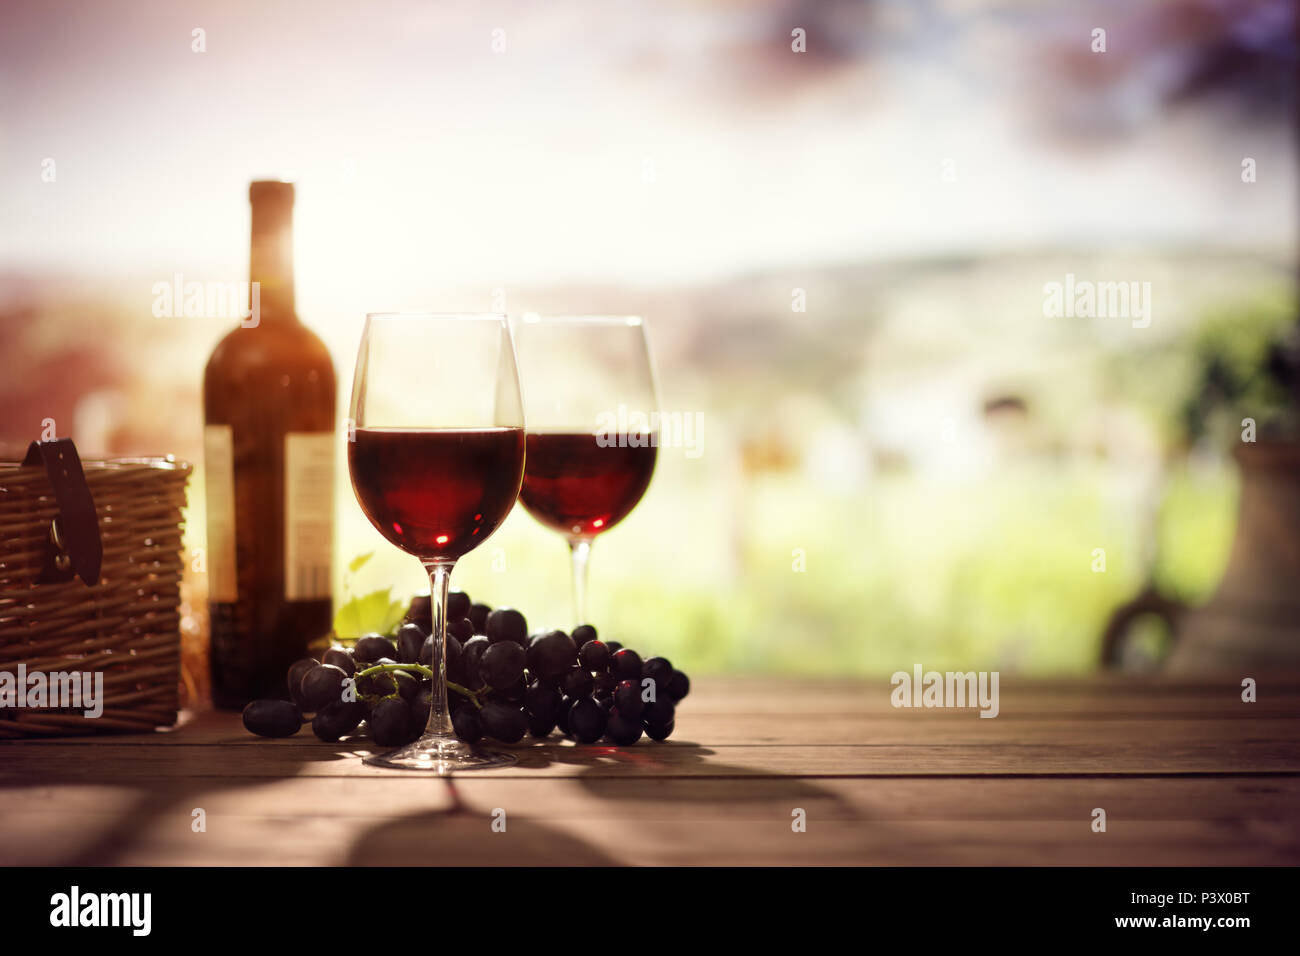 Red wine bottle and glass on table in vineyard Tuscany Italy Stock Photo